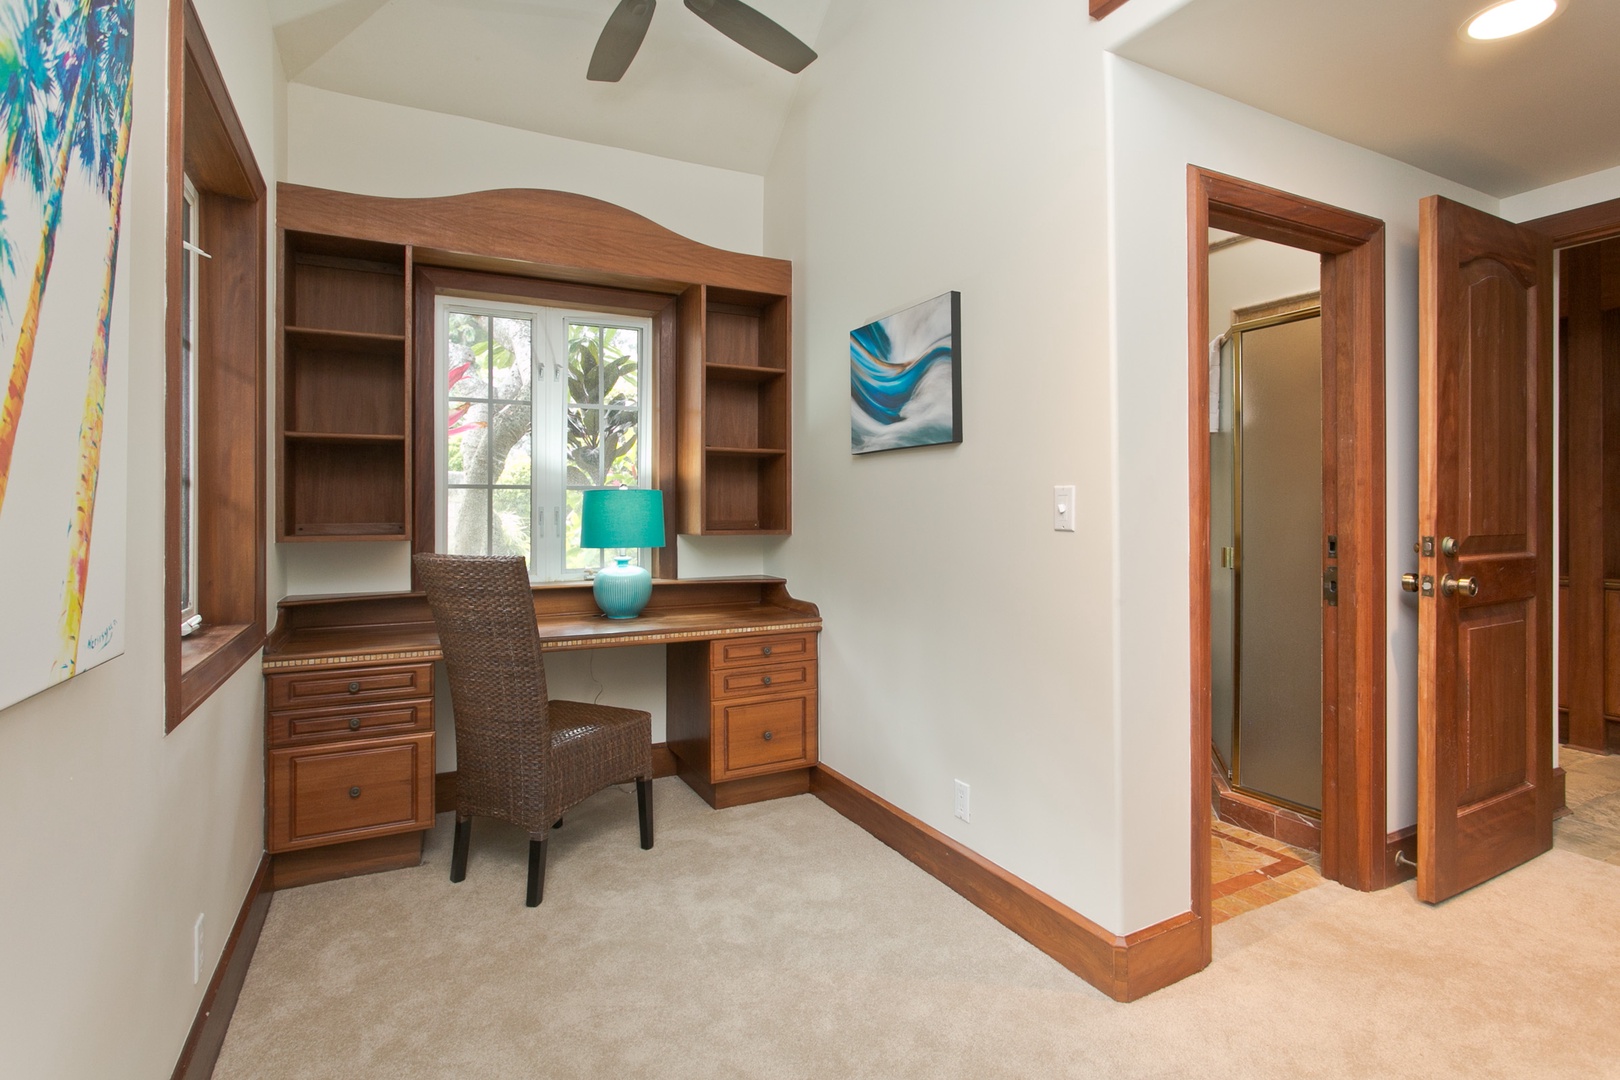 Kailua Vacation Rentals, Hale Melia* - Study nook, can be used as home office, designed for productivity in peace.